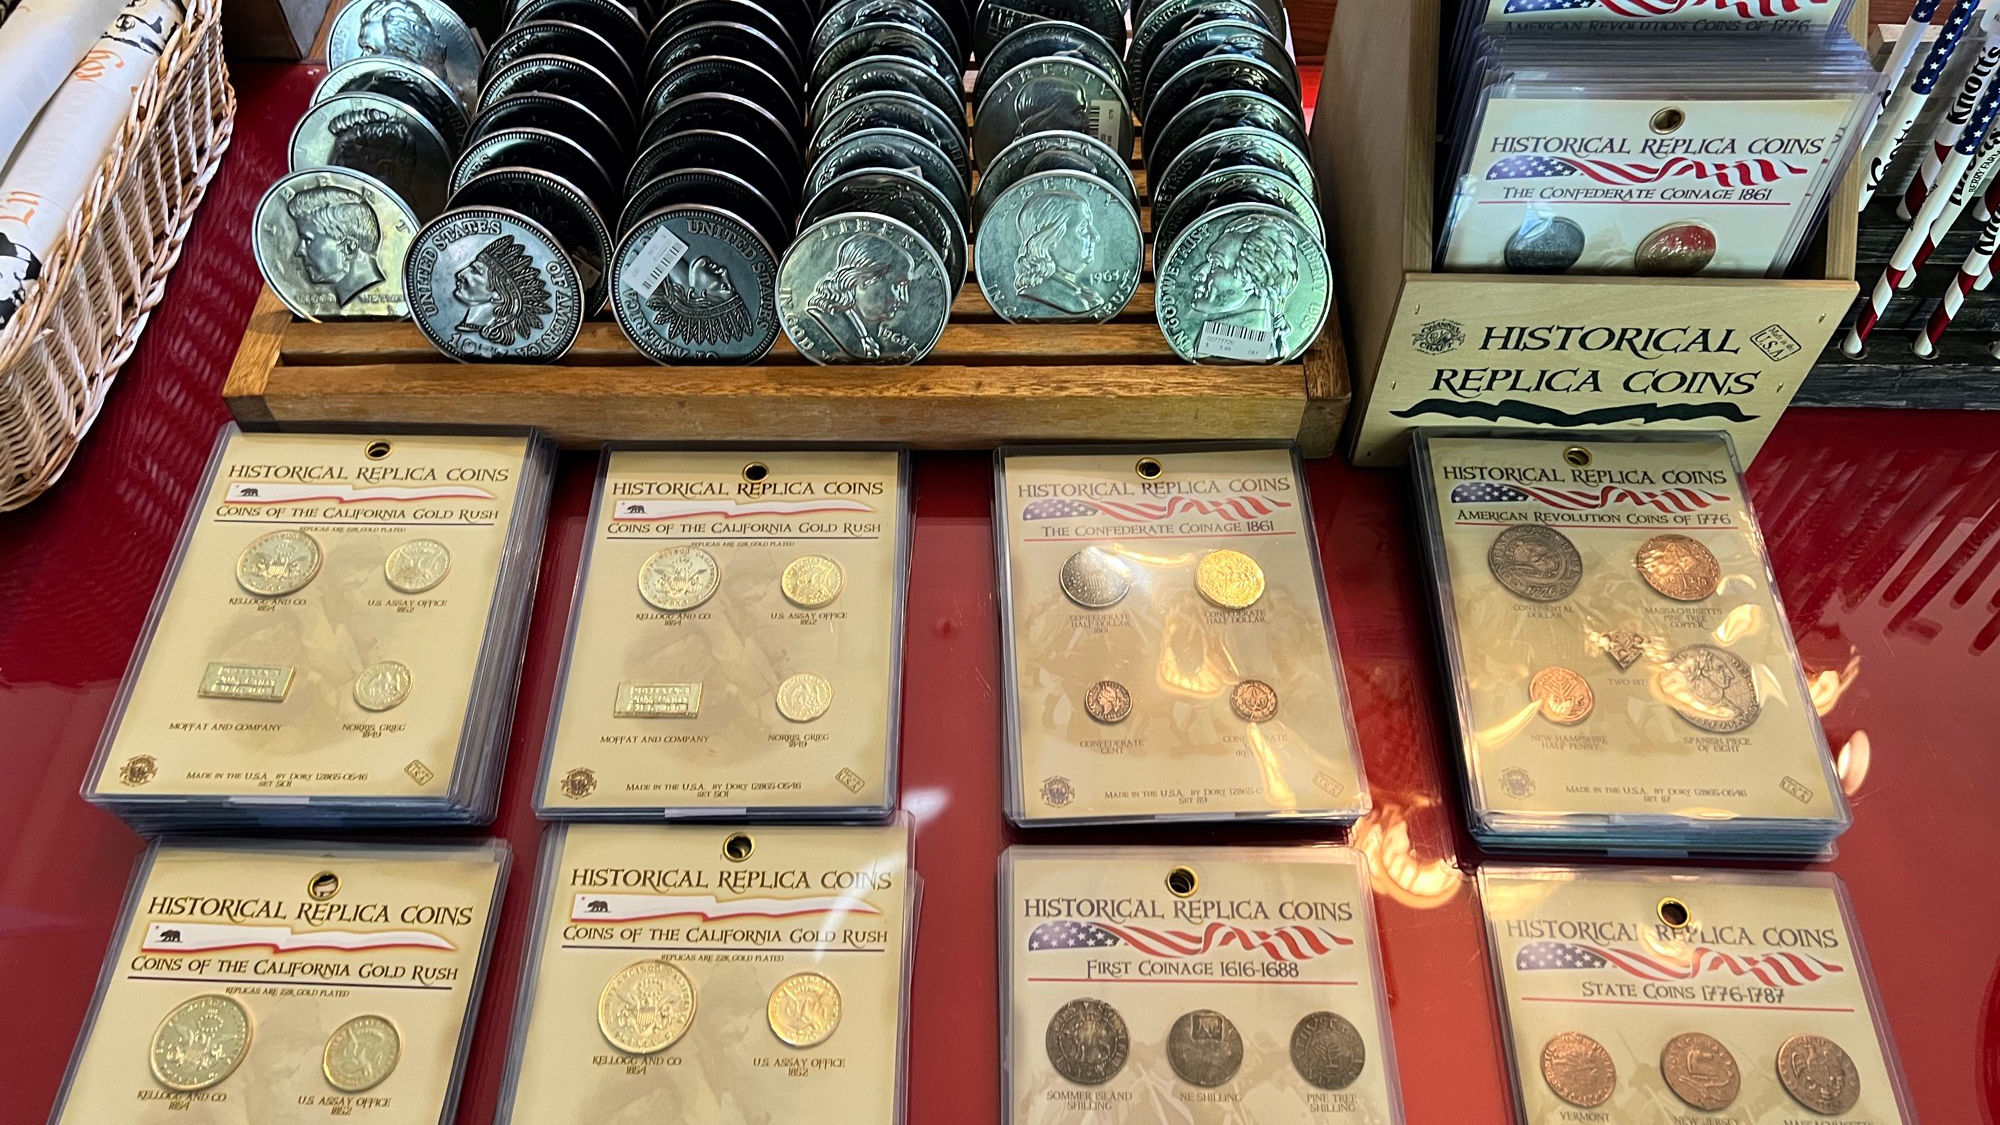 Independence Hall Gift Shop Replica Coins